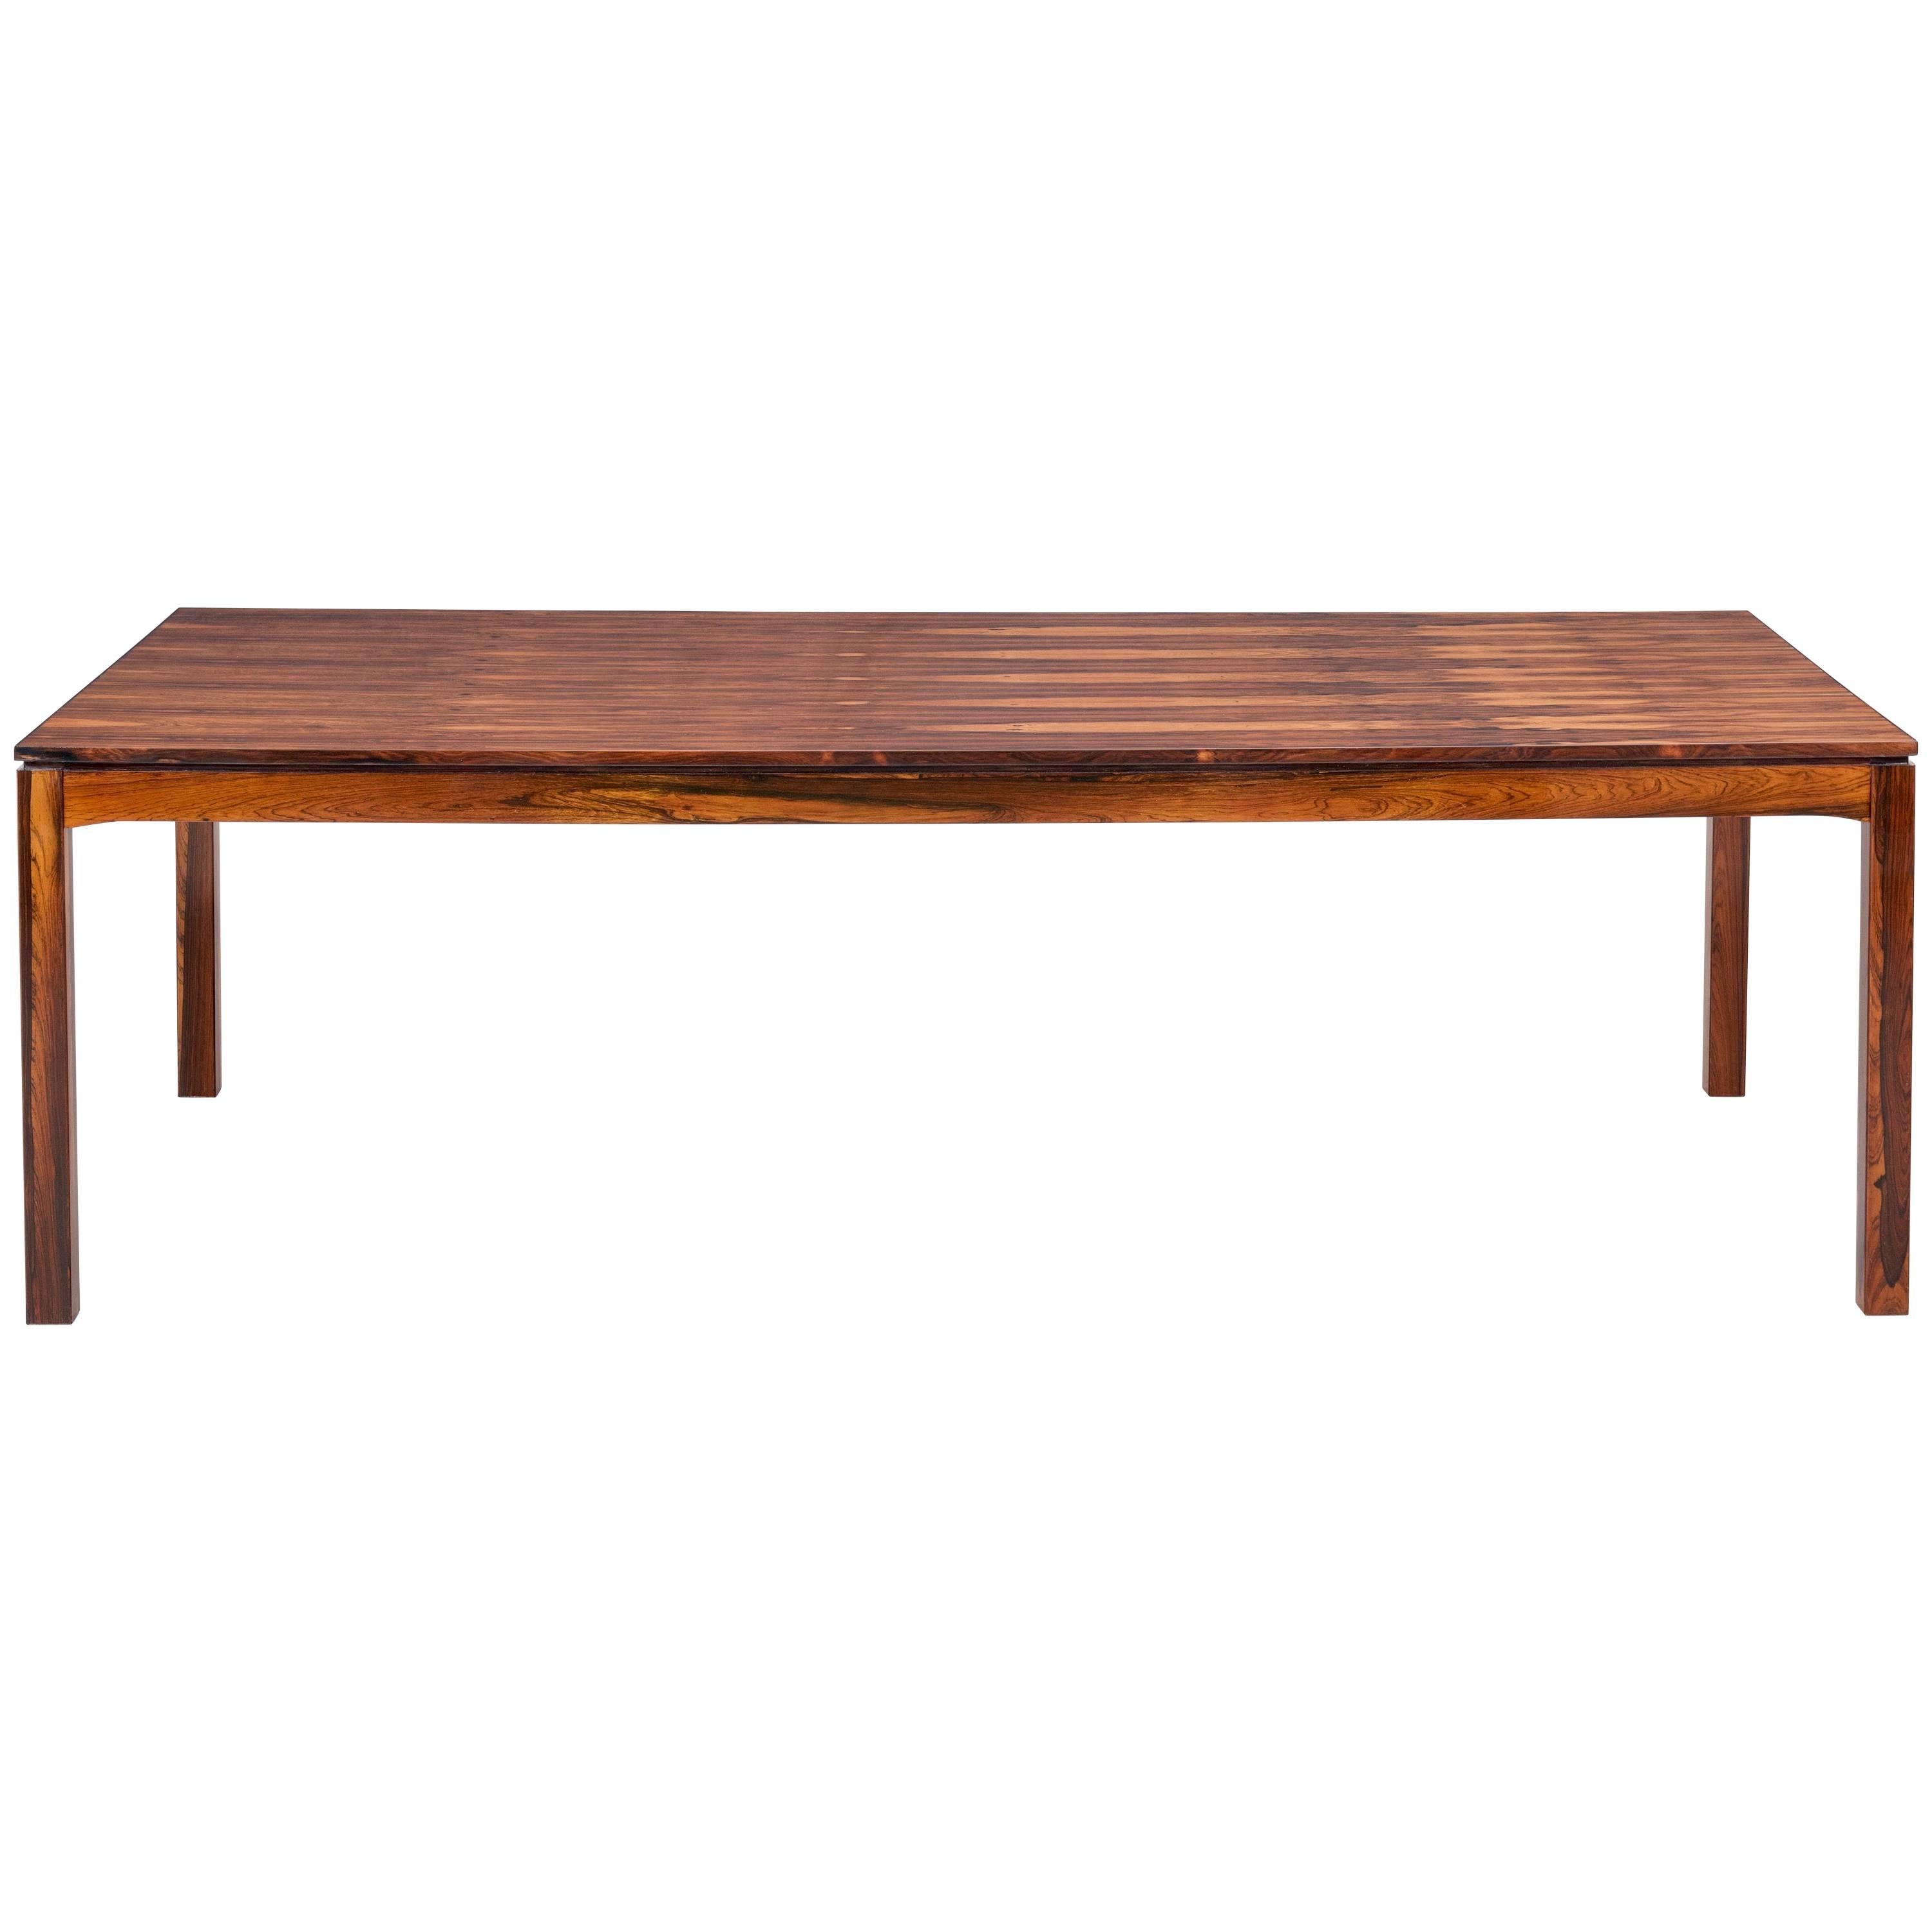 1960's Brazilian Dining / Conference Table in Spectacular Rosewood  For Sale